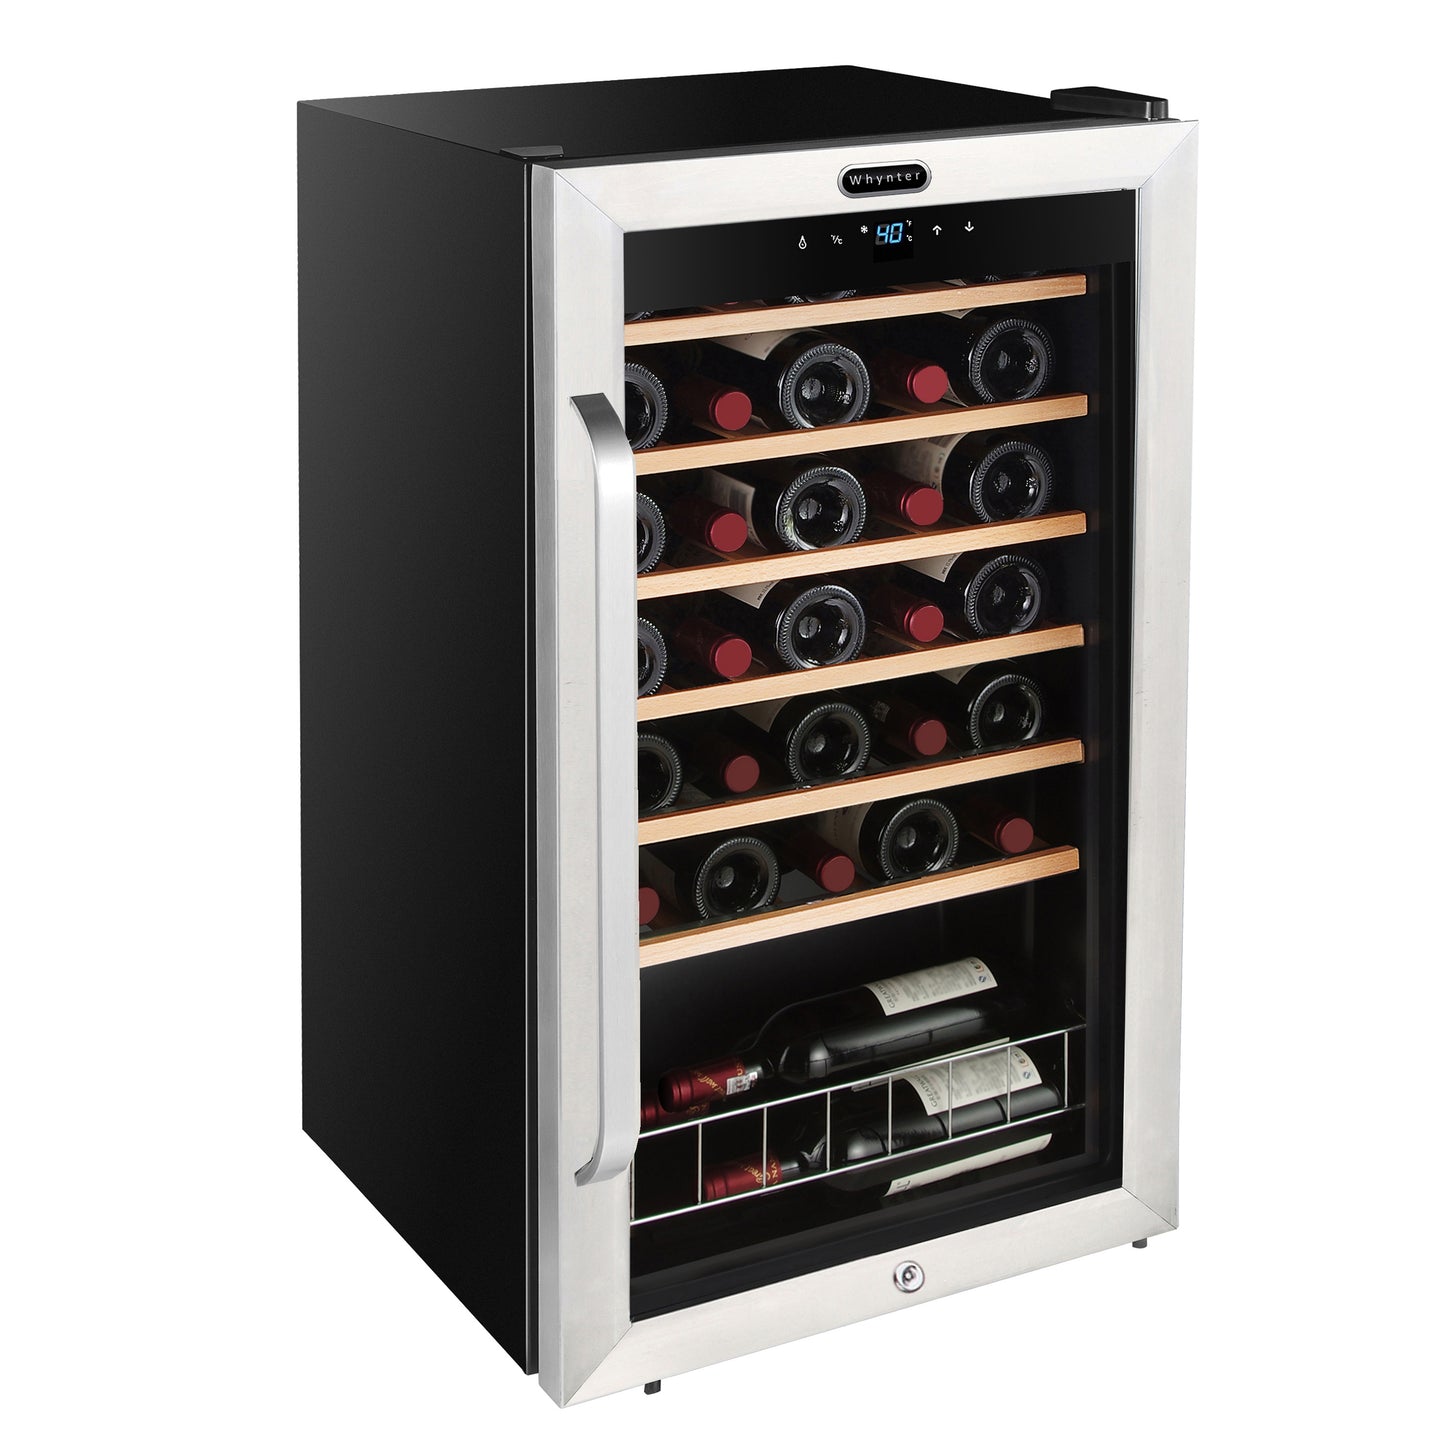 A stainless steel wine fridge with 166 bottles of wine on adjustable shelves and a wire display rack.